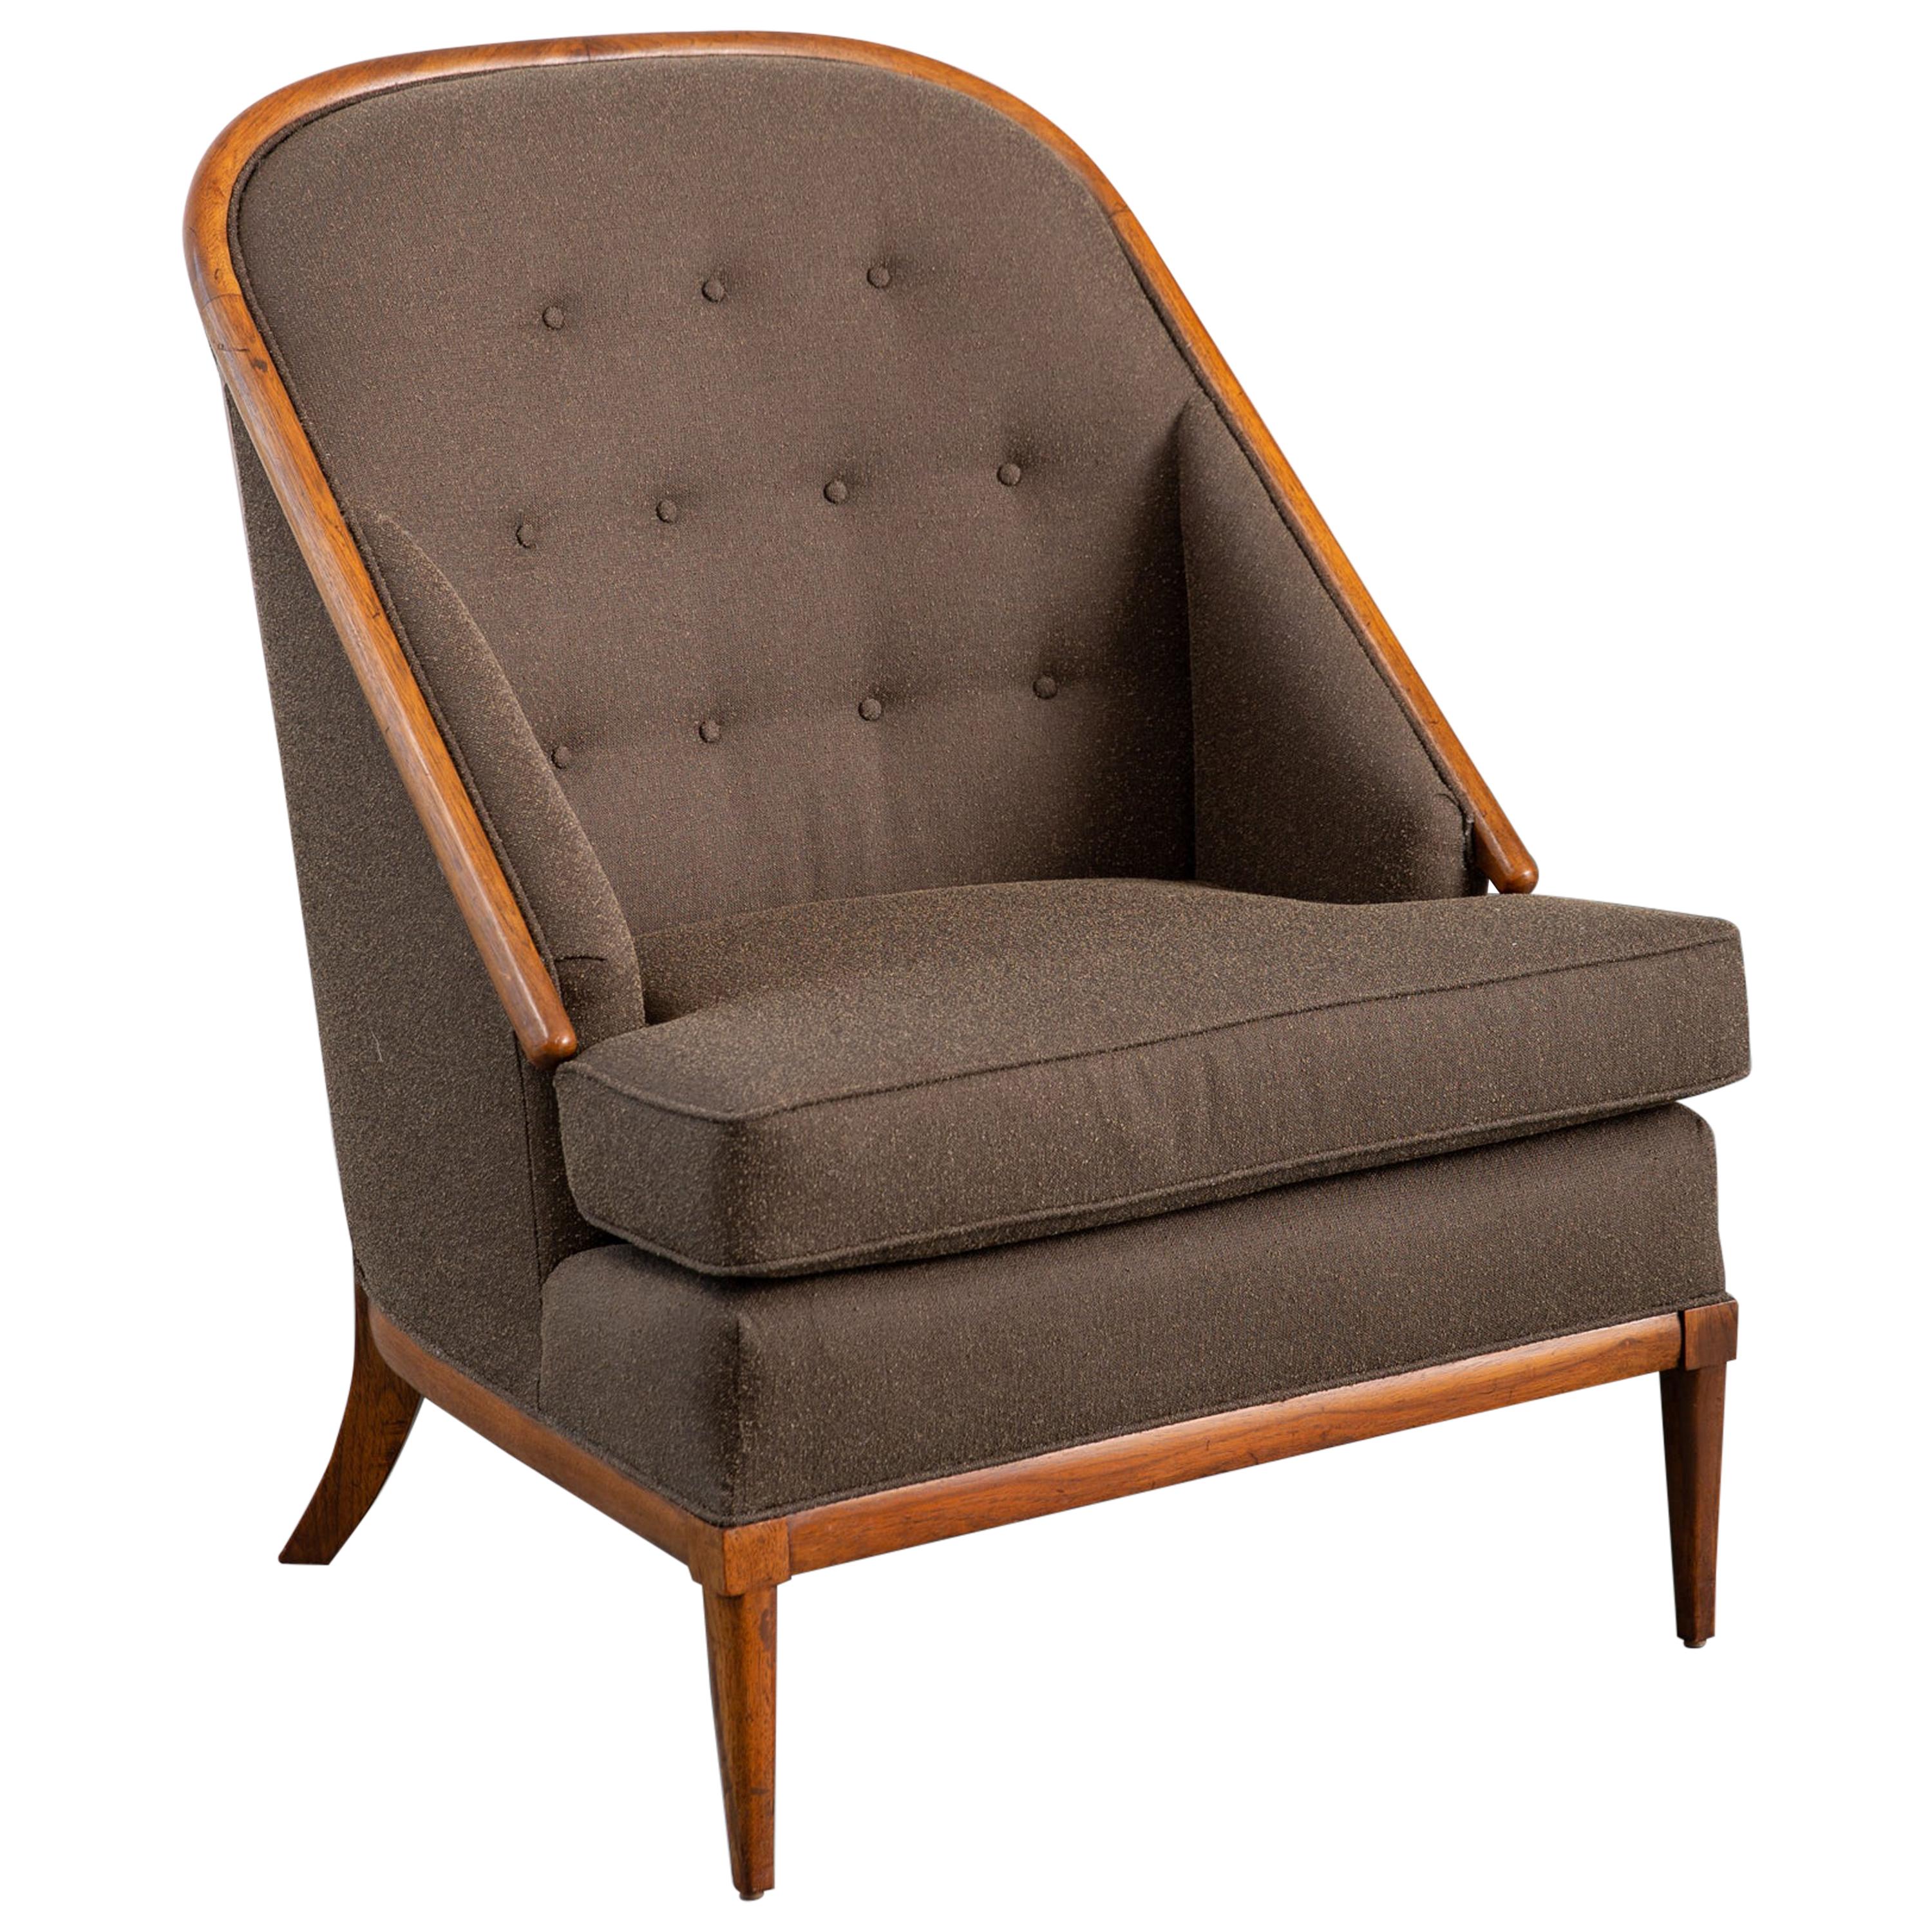 Newly Upholstered Mid-Century Modern Lounge Chair Attributed to Widdicomb